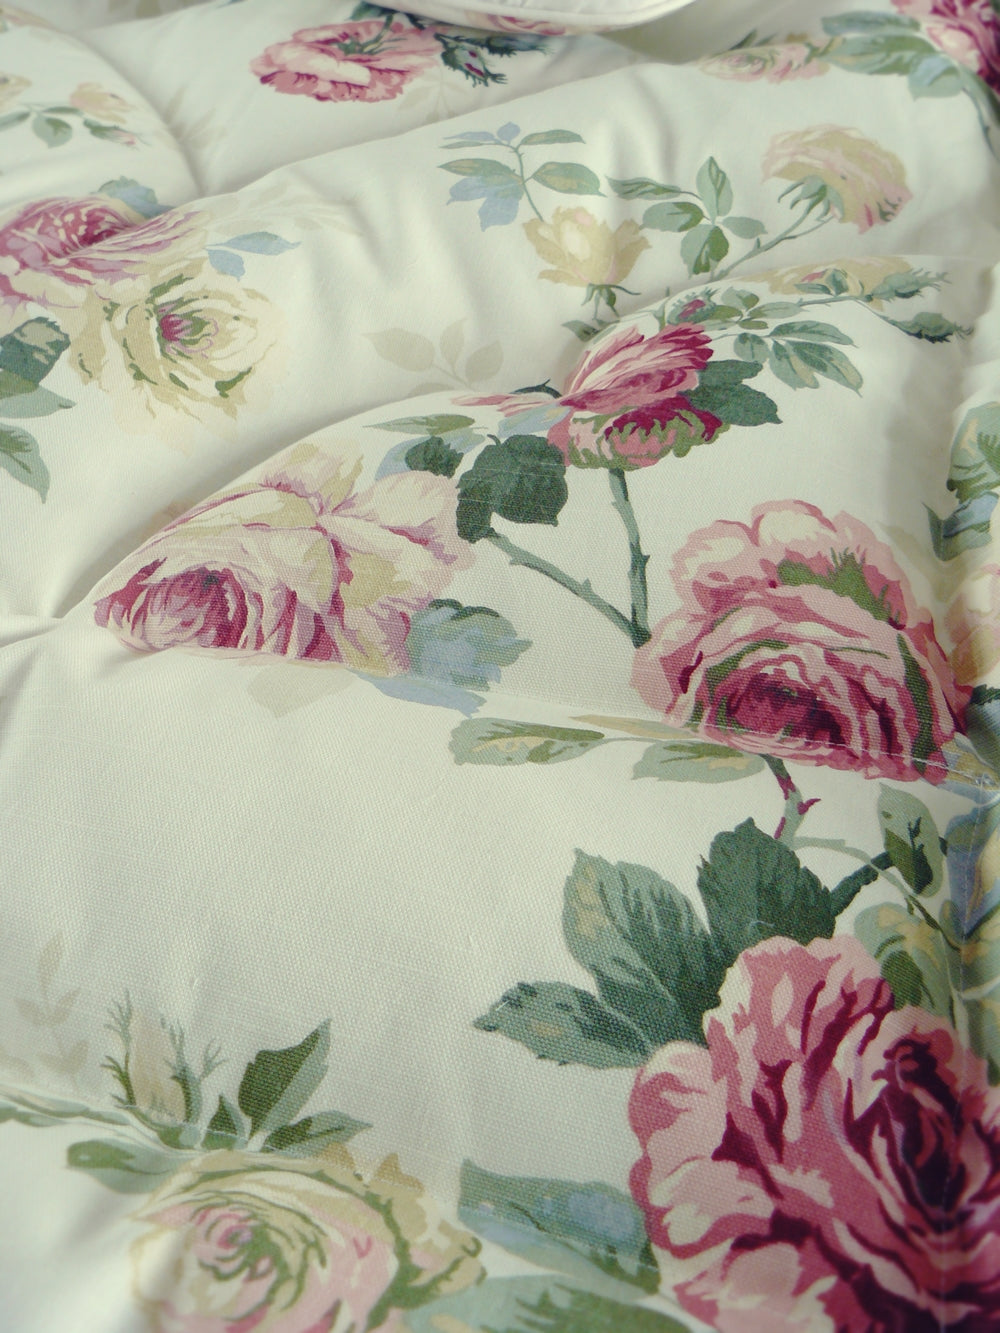 Pale Yellow Roses SINGLE Eiderdown - ONLY 1 LEFT!